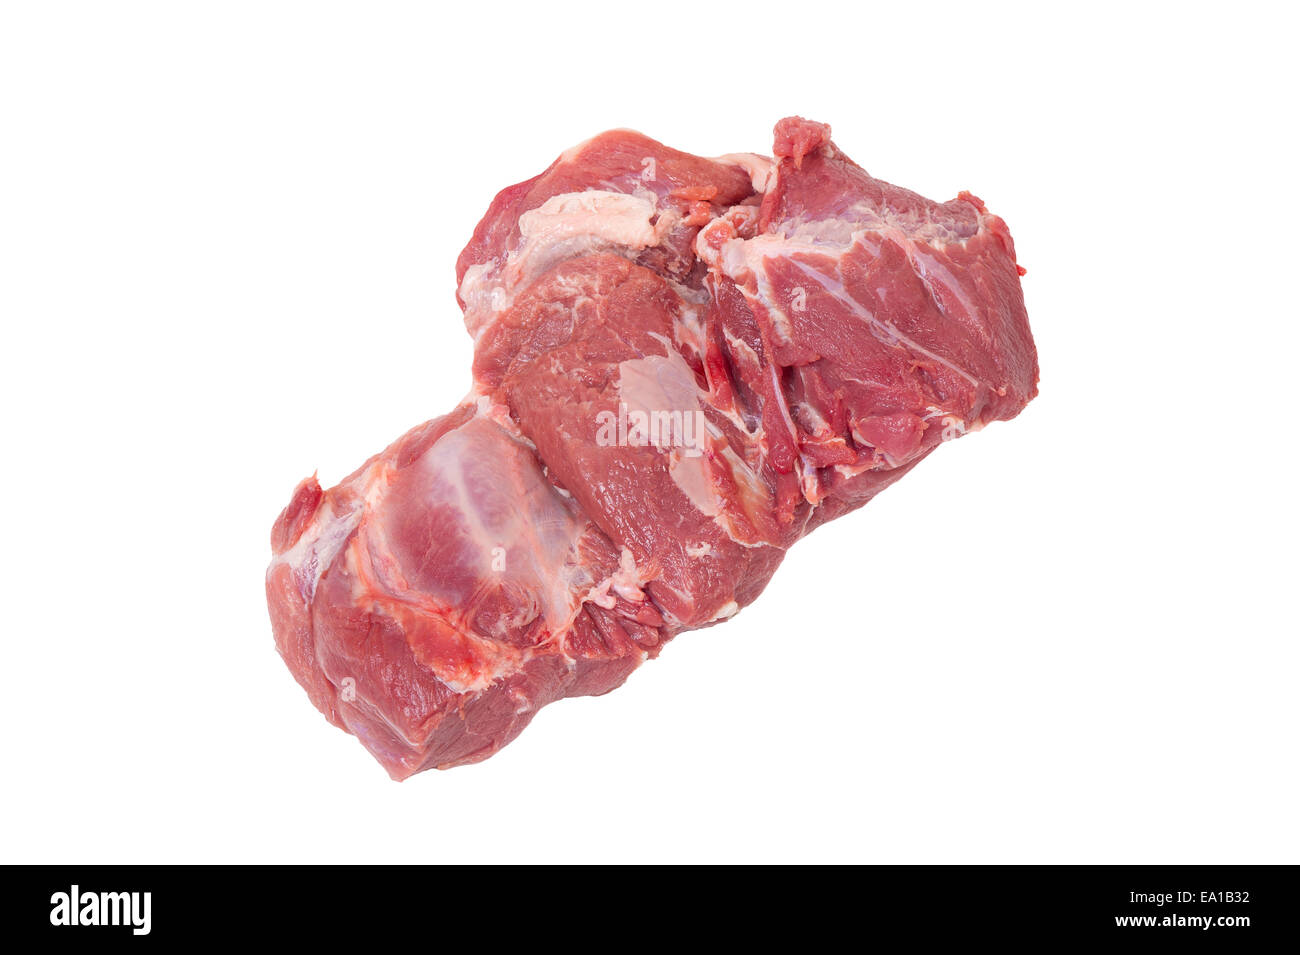 butcher's meat Stock Photo